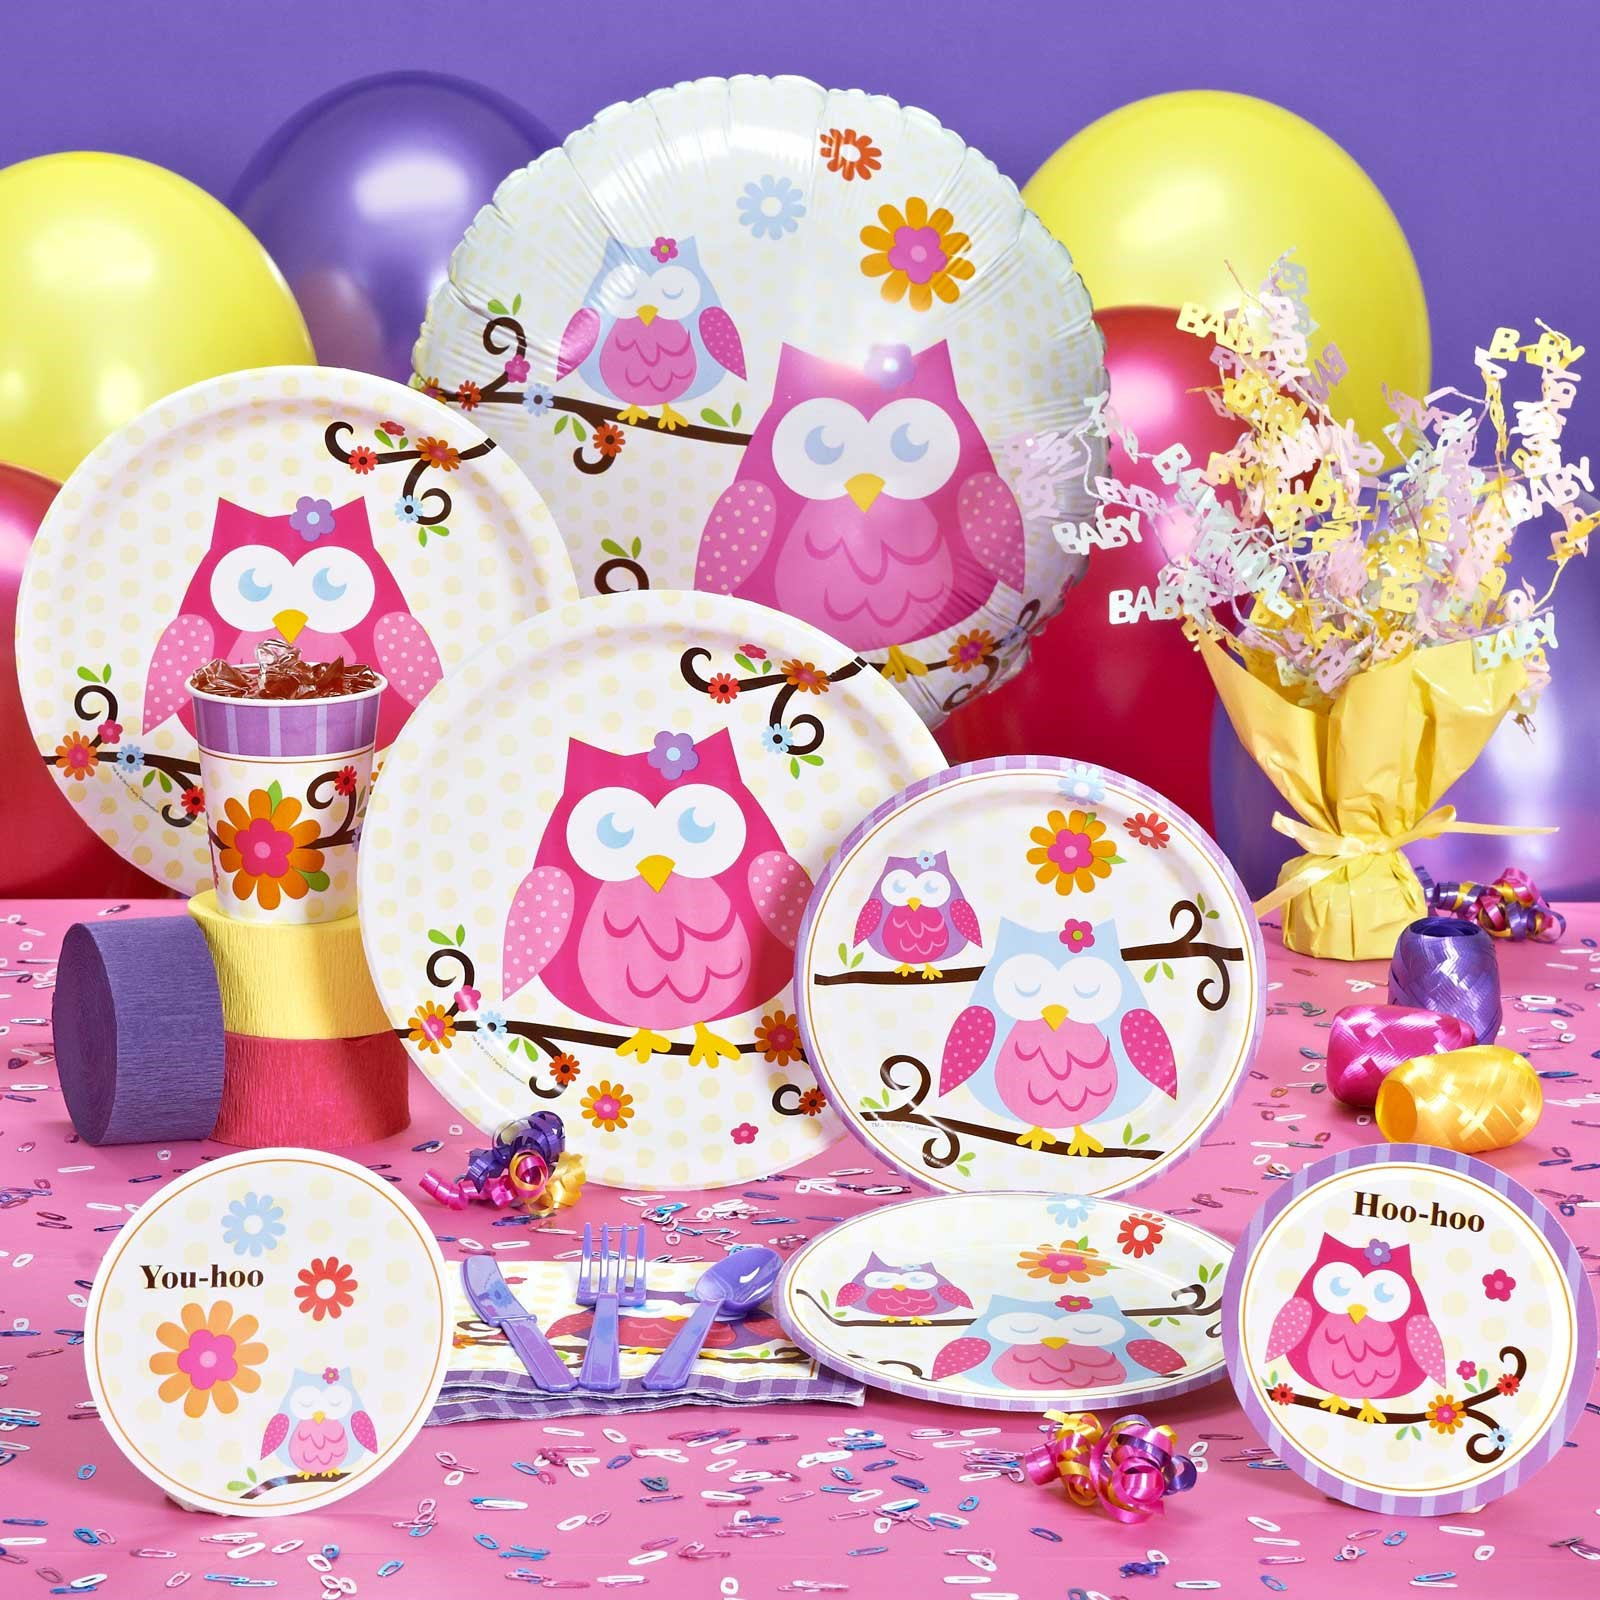 Owl Baby Shower Decorations Party City
 Party Supplies For Baby Shower